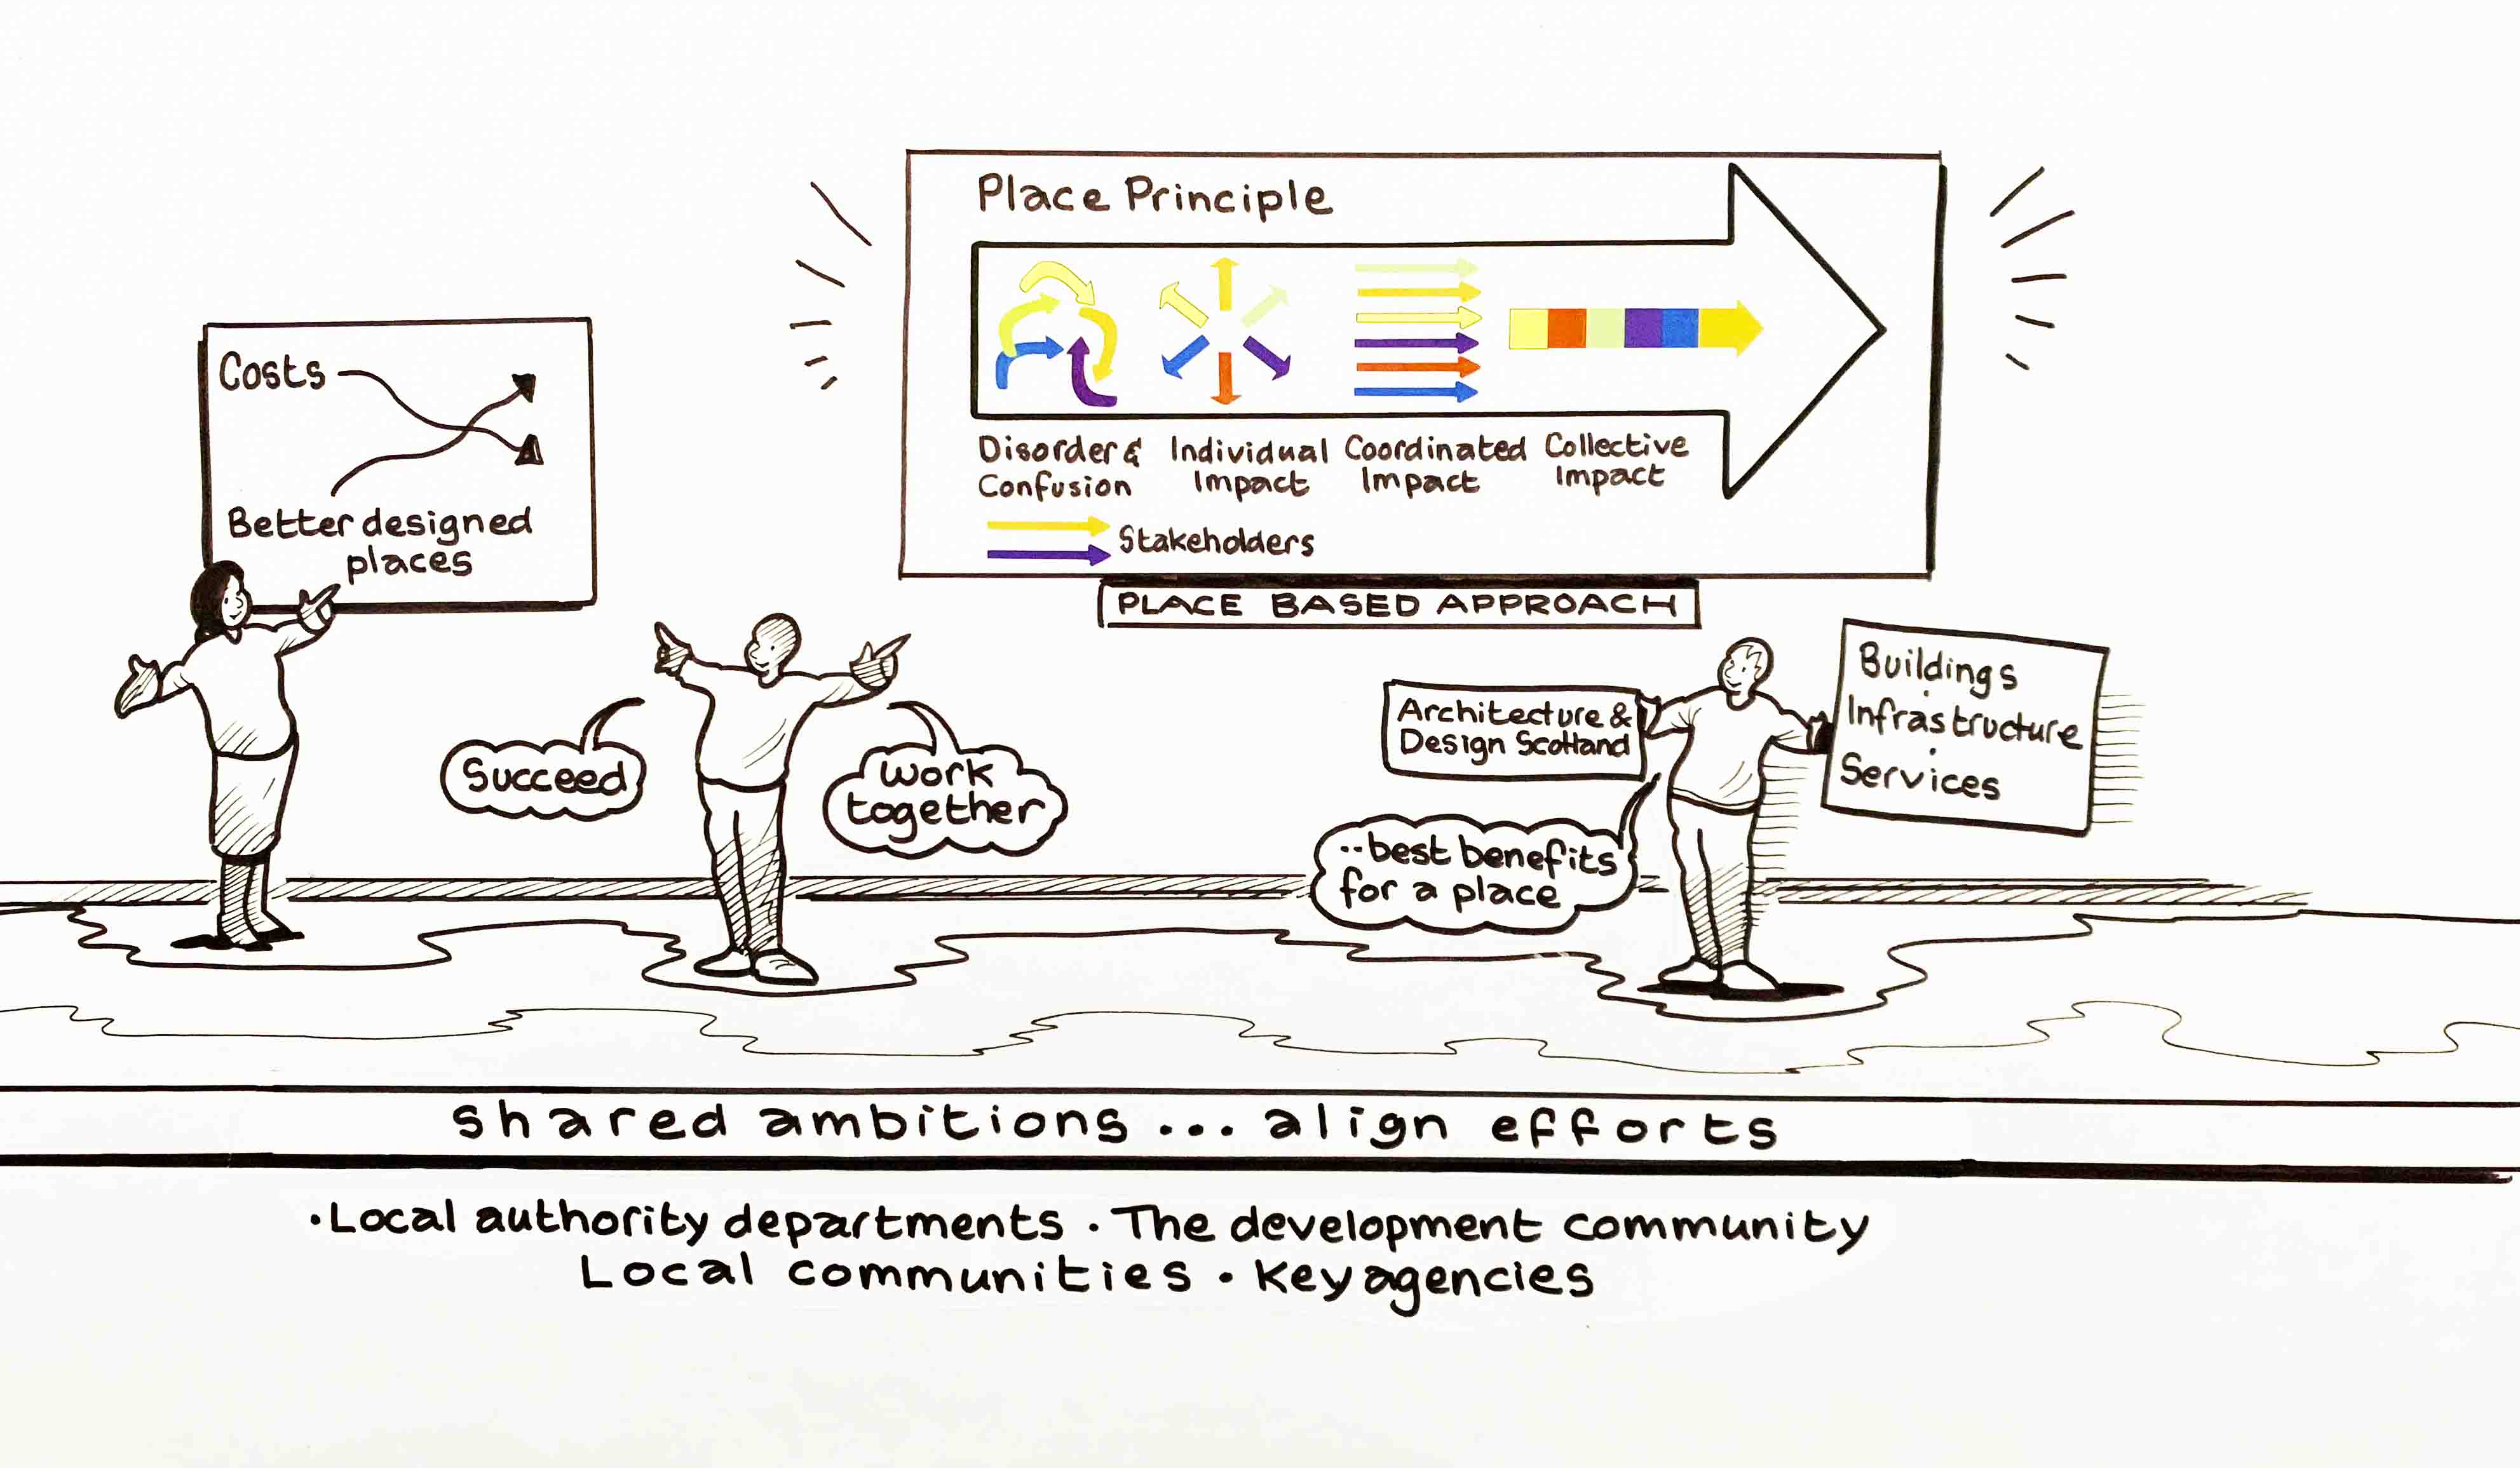 A drawing of the Place Principle method with words 'shared ambitions..align efforts'